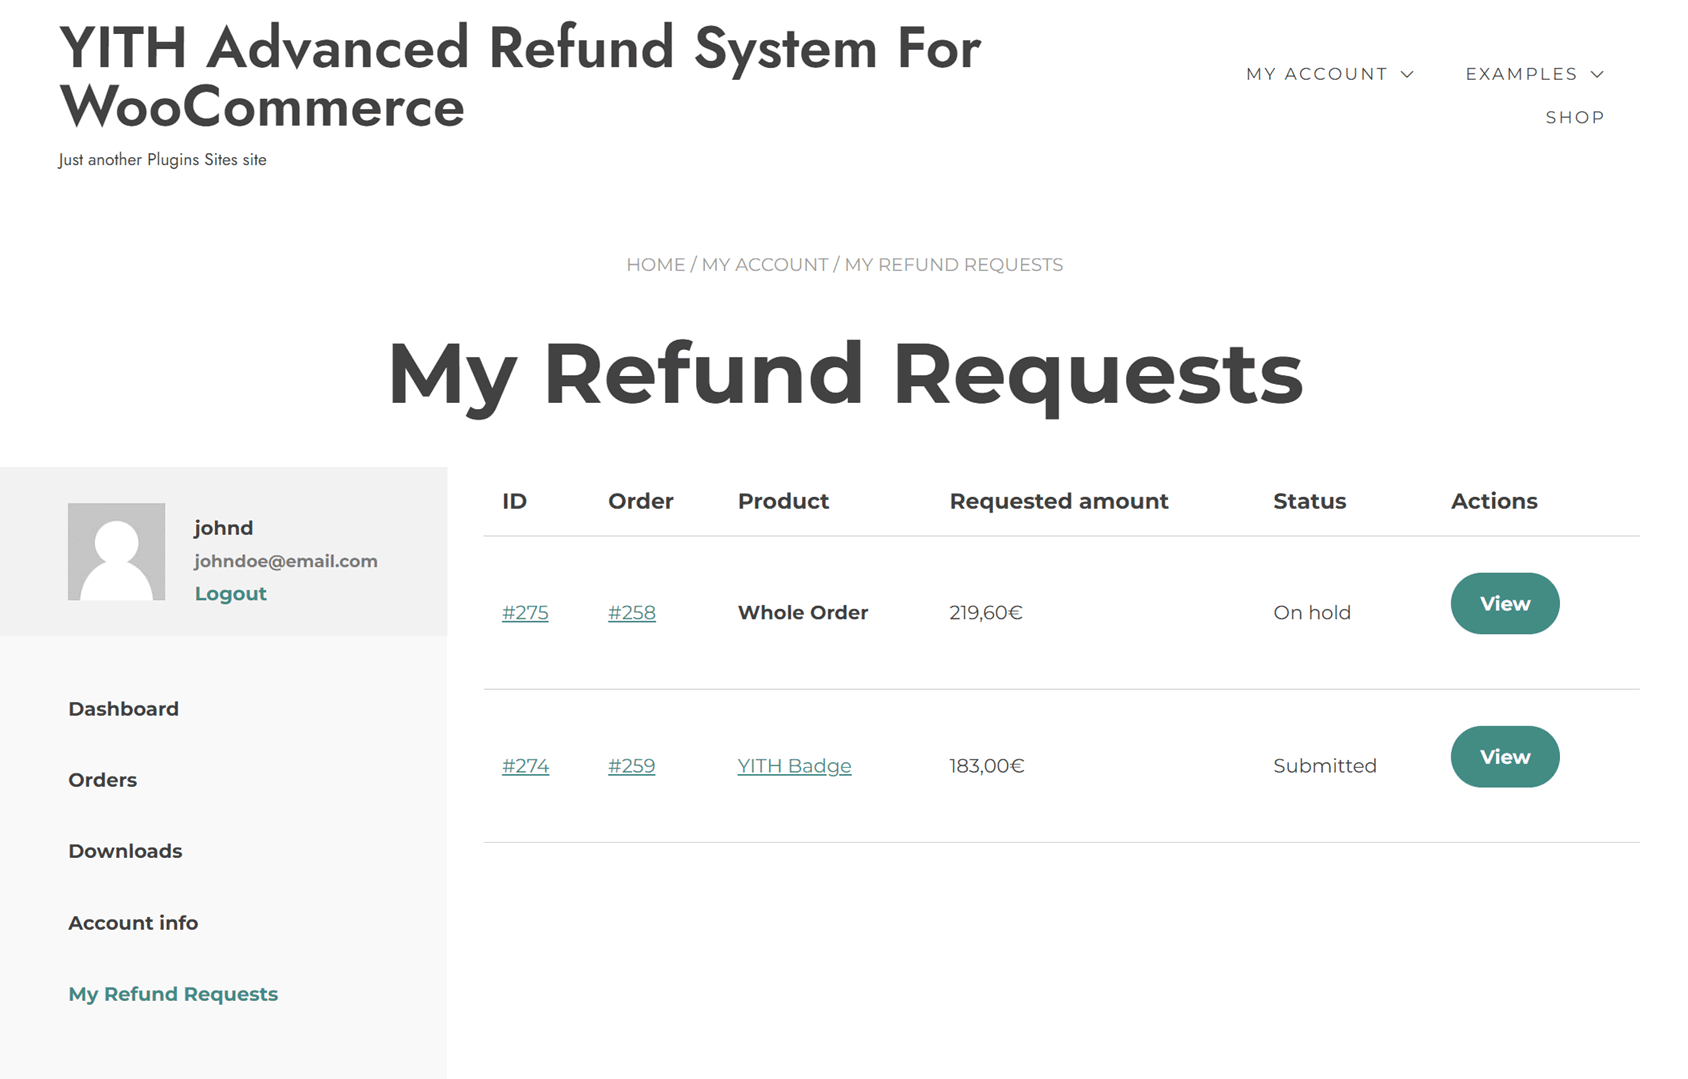 YITH Advanced Refund System For WooCommerce